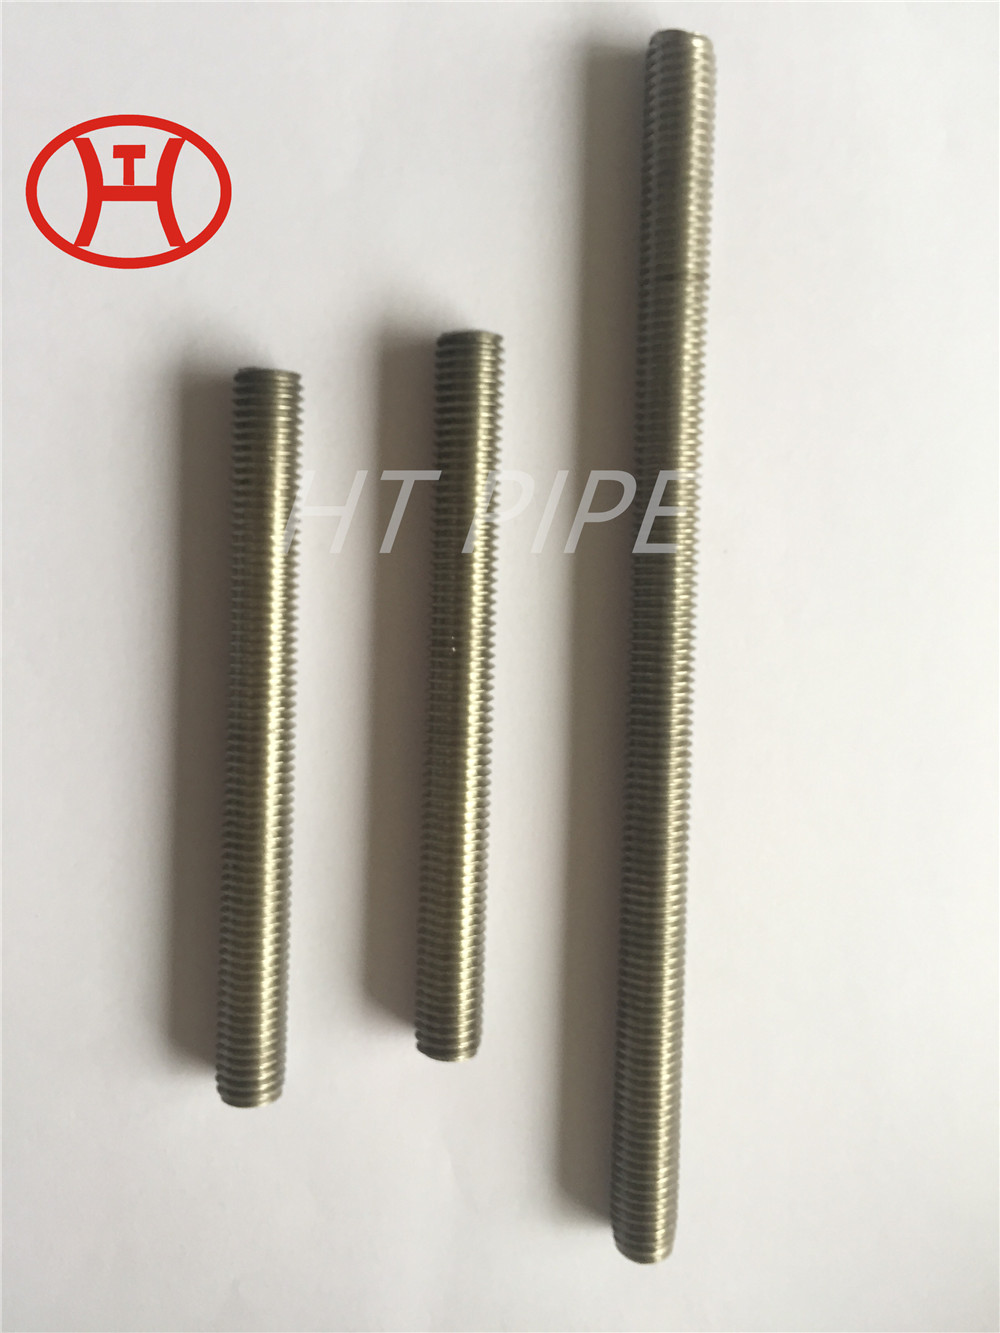 nickel alloy Alloy 20 UNS N08020 full thread stud bolt DIN976 with chamfer